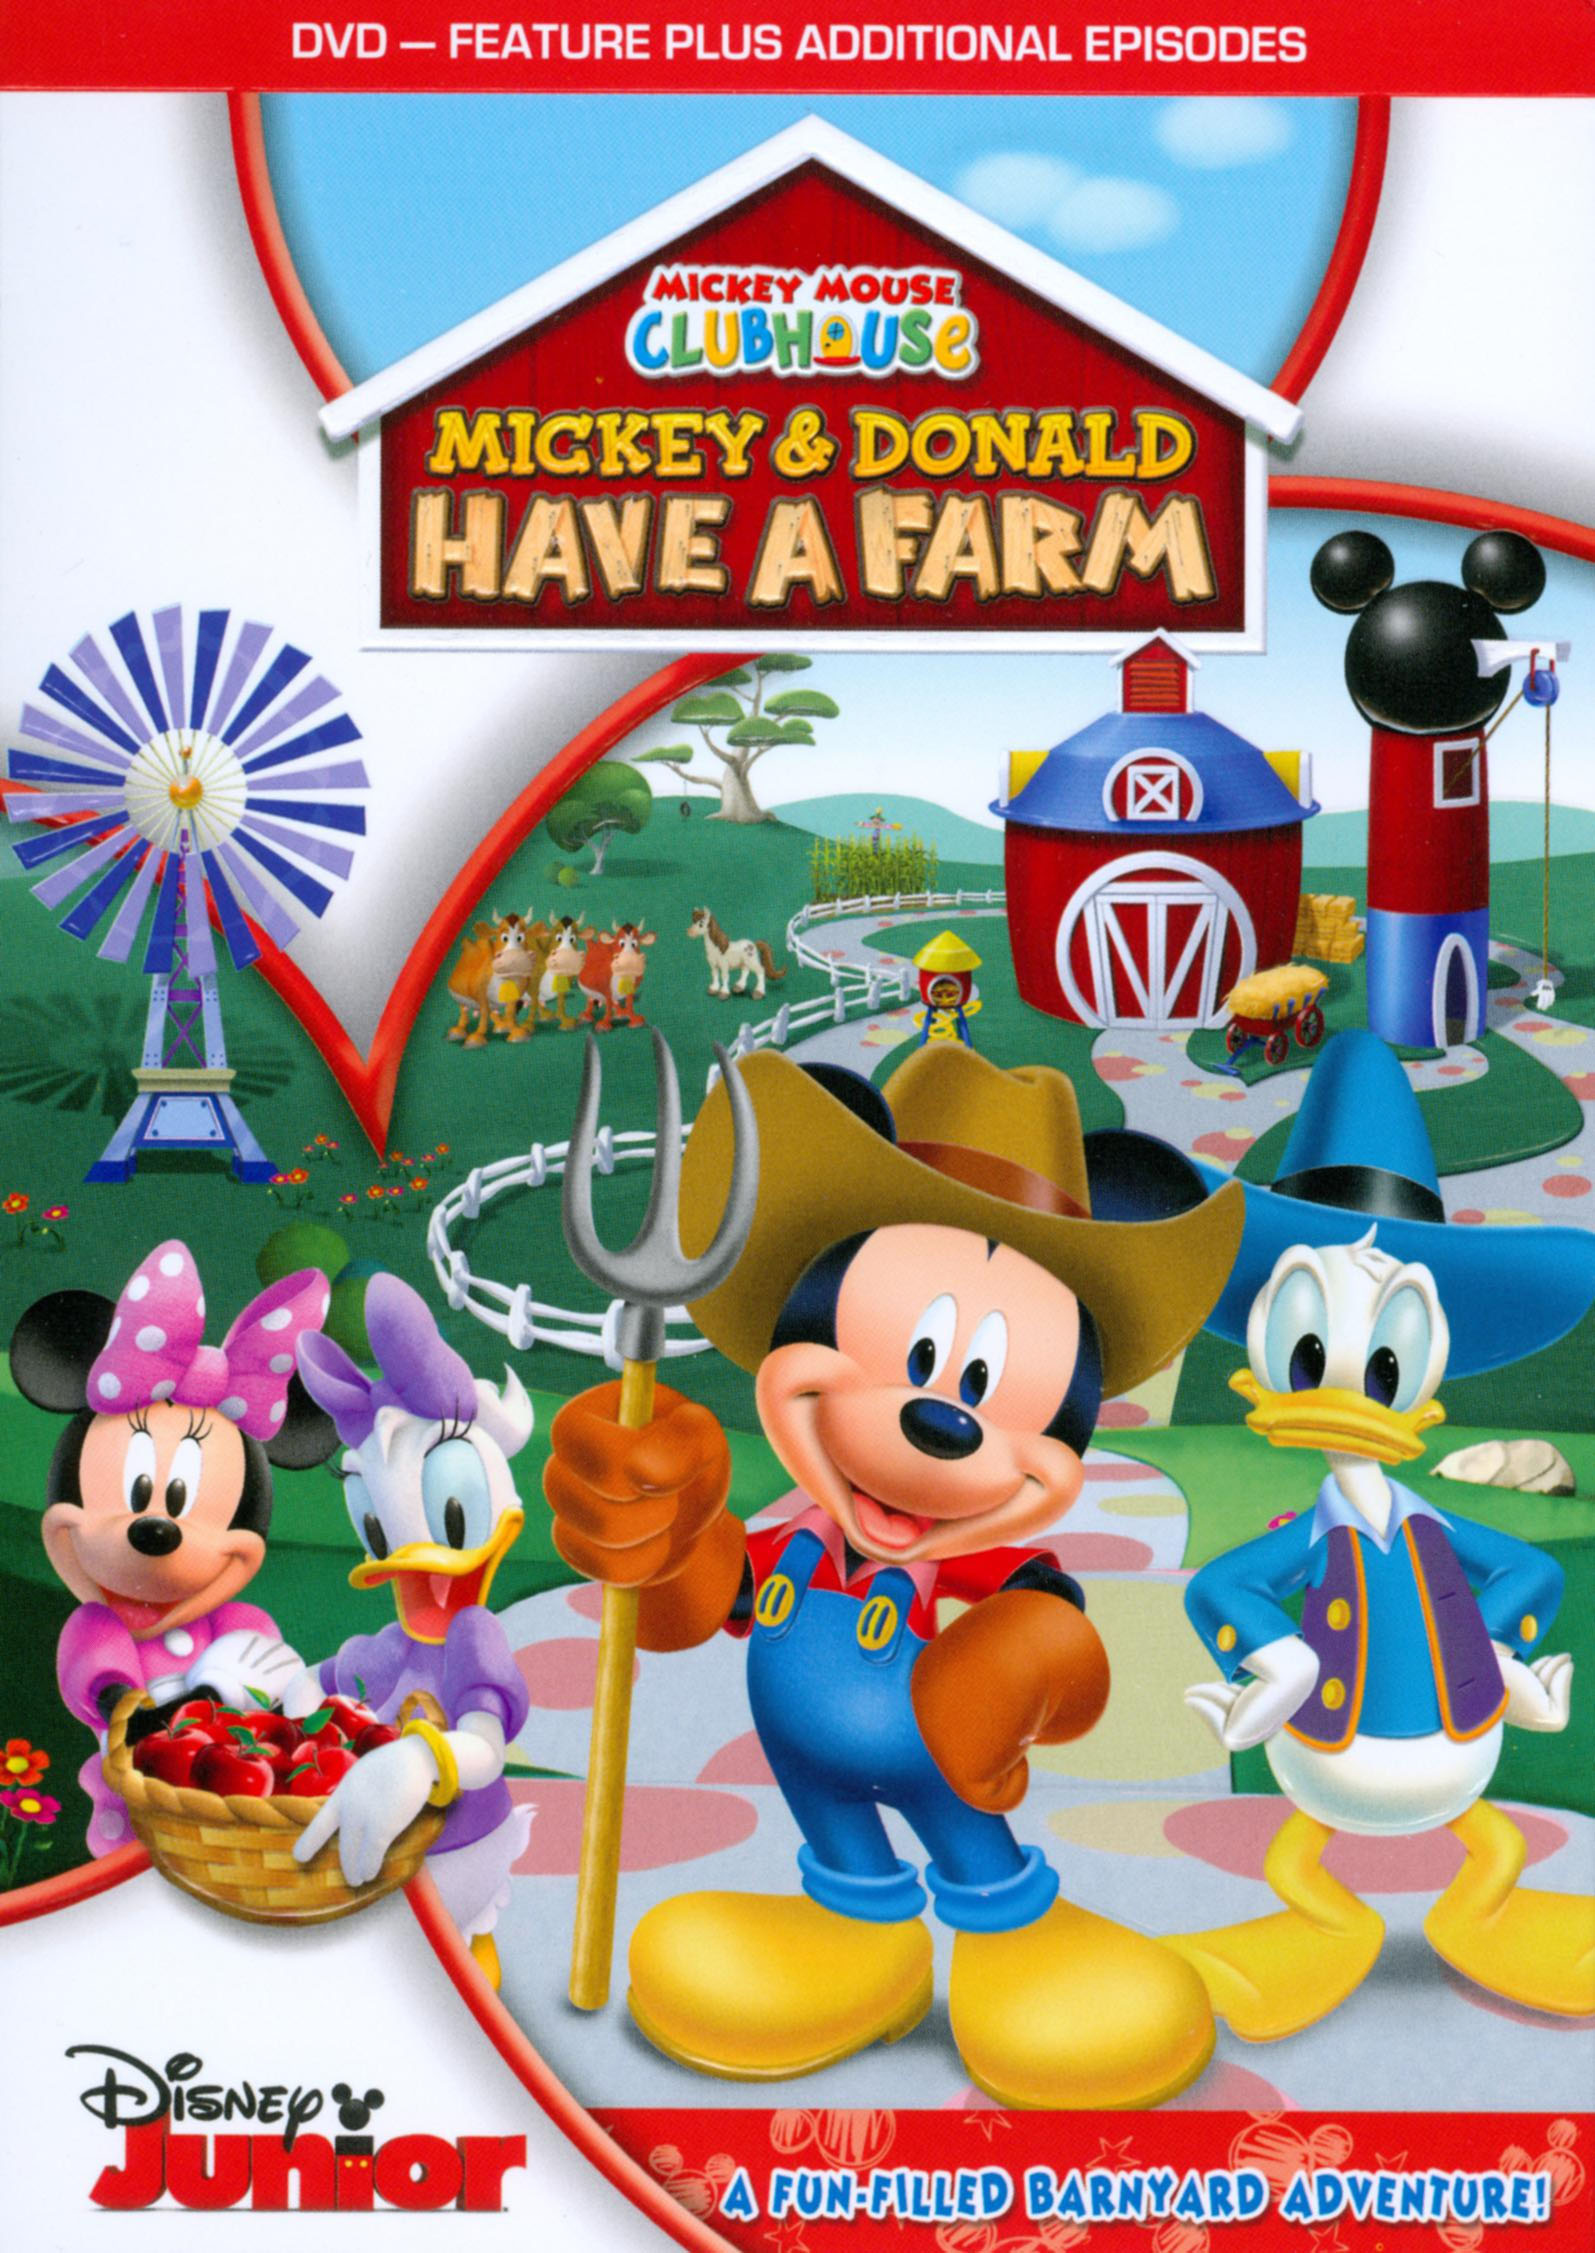 Birthplace violation To contribute Mickey Mouse Clubhouse: Mickey & Donald Have a Farm - Best Buy